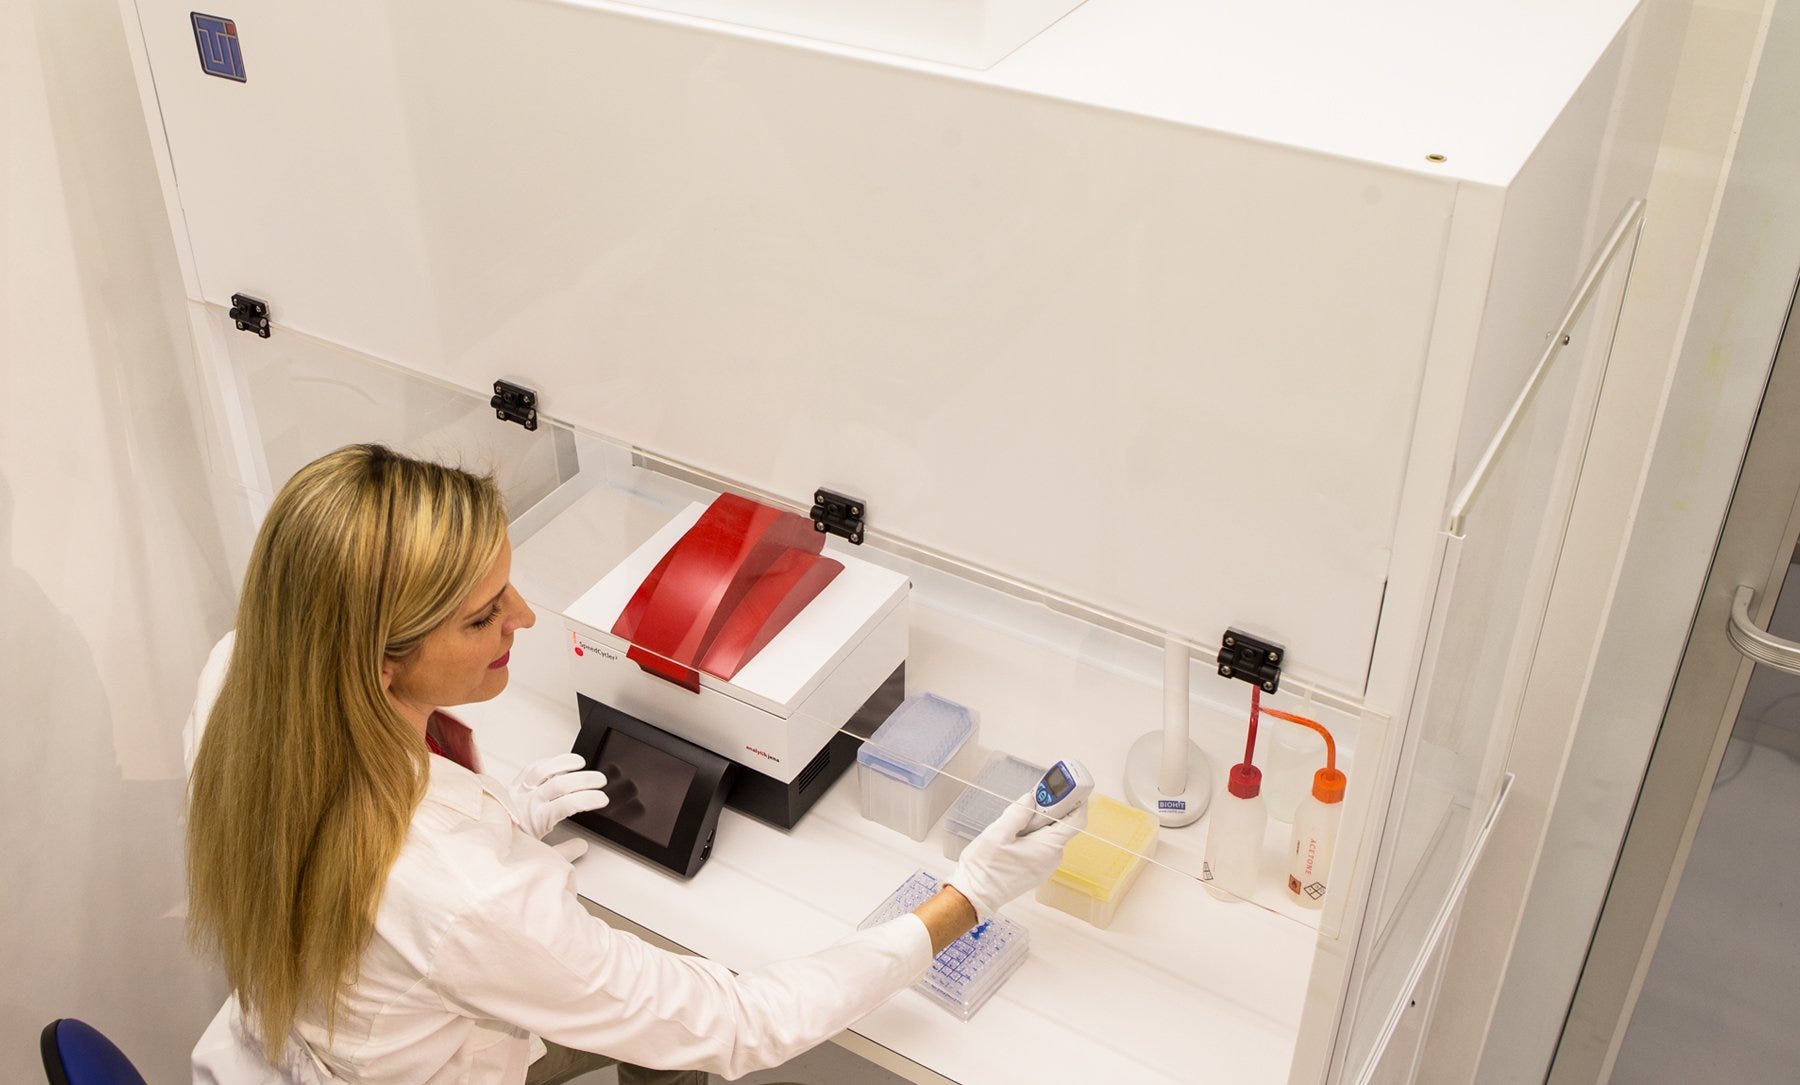 Terra’s benchtop laminar flow hoods provide a clean, contaminant-free environment for PCR preparation, amplification and analysis